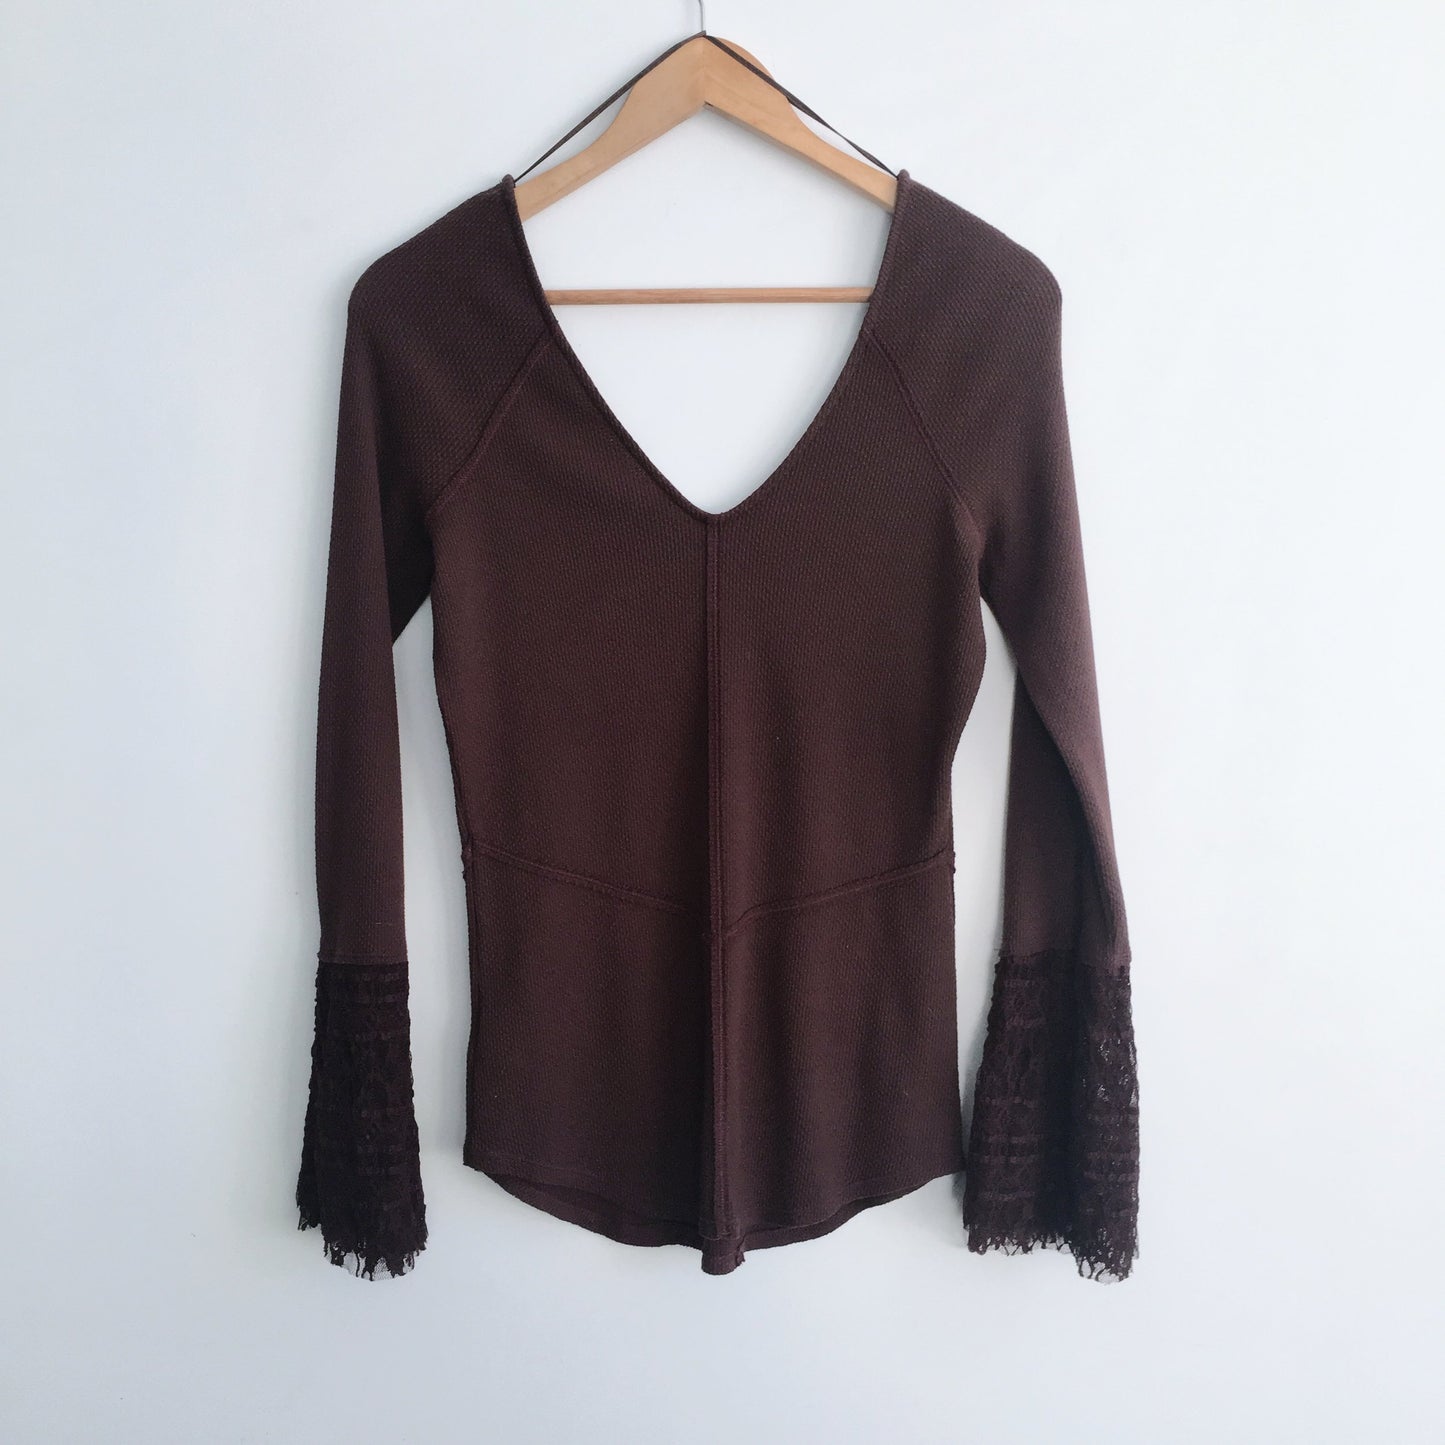 Free People Thermal with Juliet Cuff - size Large